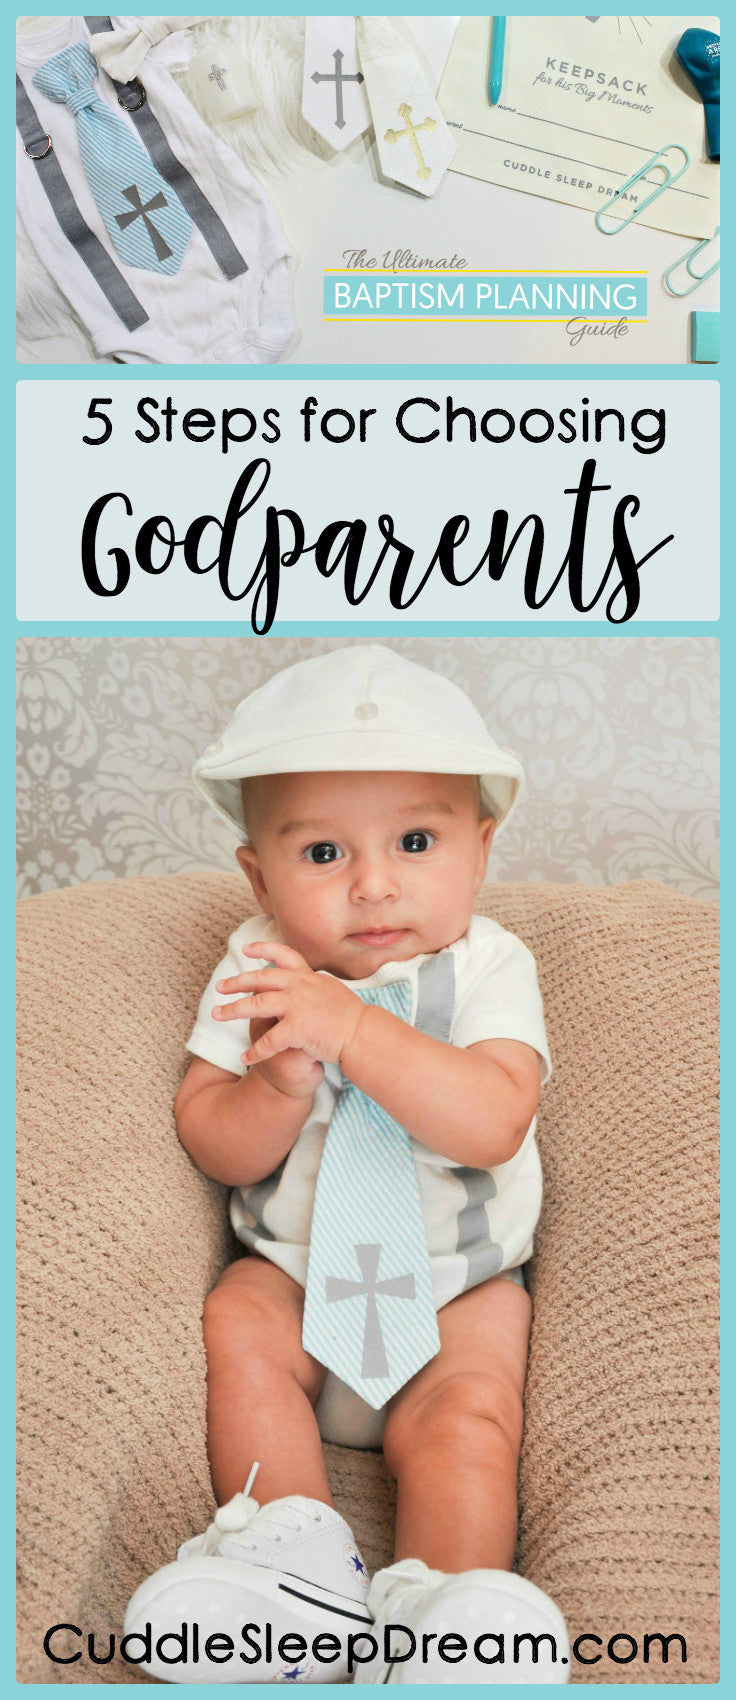 how-to-choose-godparents-in-5-steps-ultimate-baptism-planning-guide-cuddle-sleep-dream